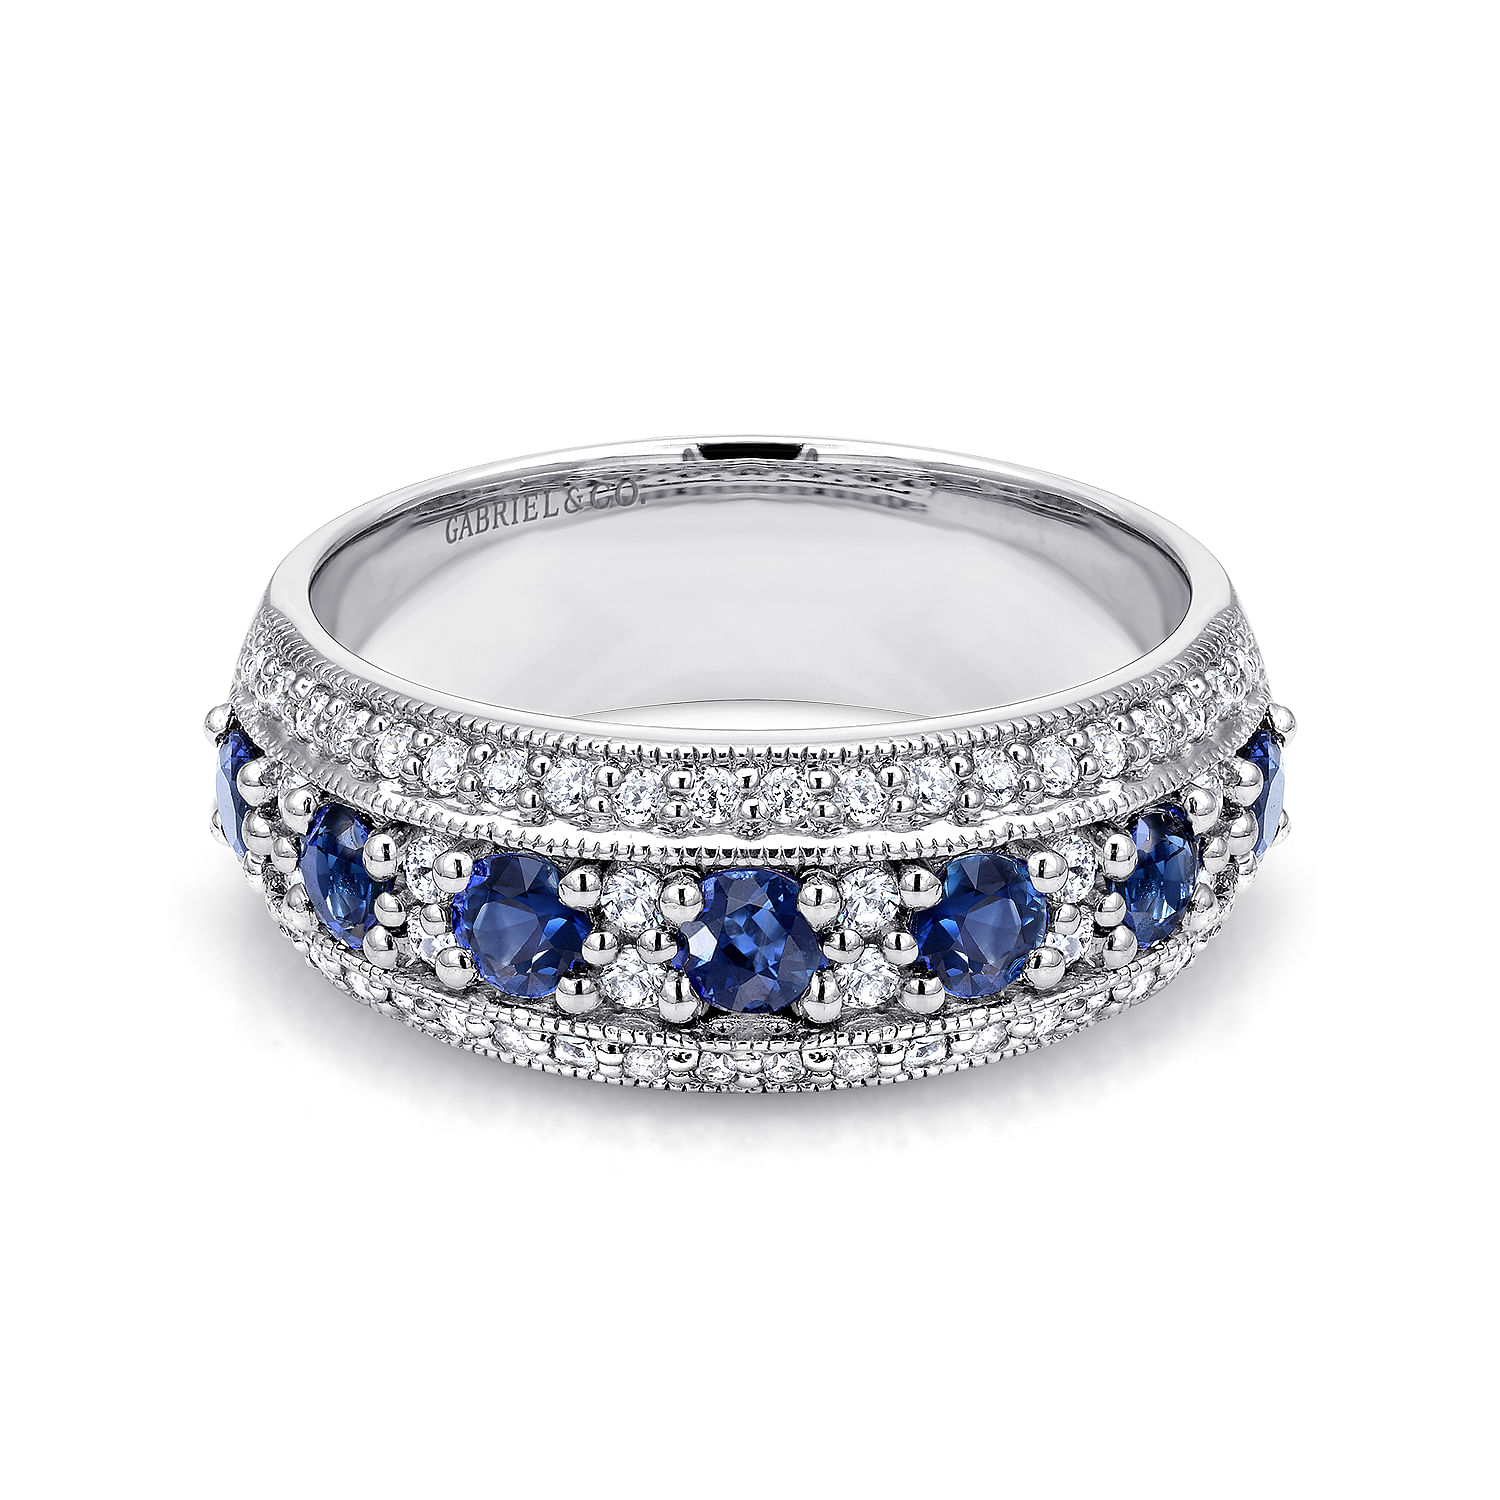 Gabriel - 14k White Gold Vintage Inspired Alternating Sapphire and Diamond Band